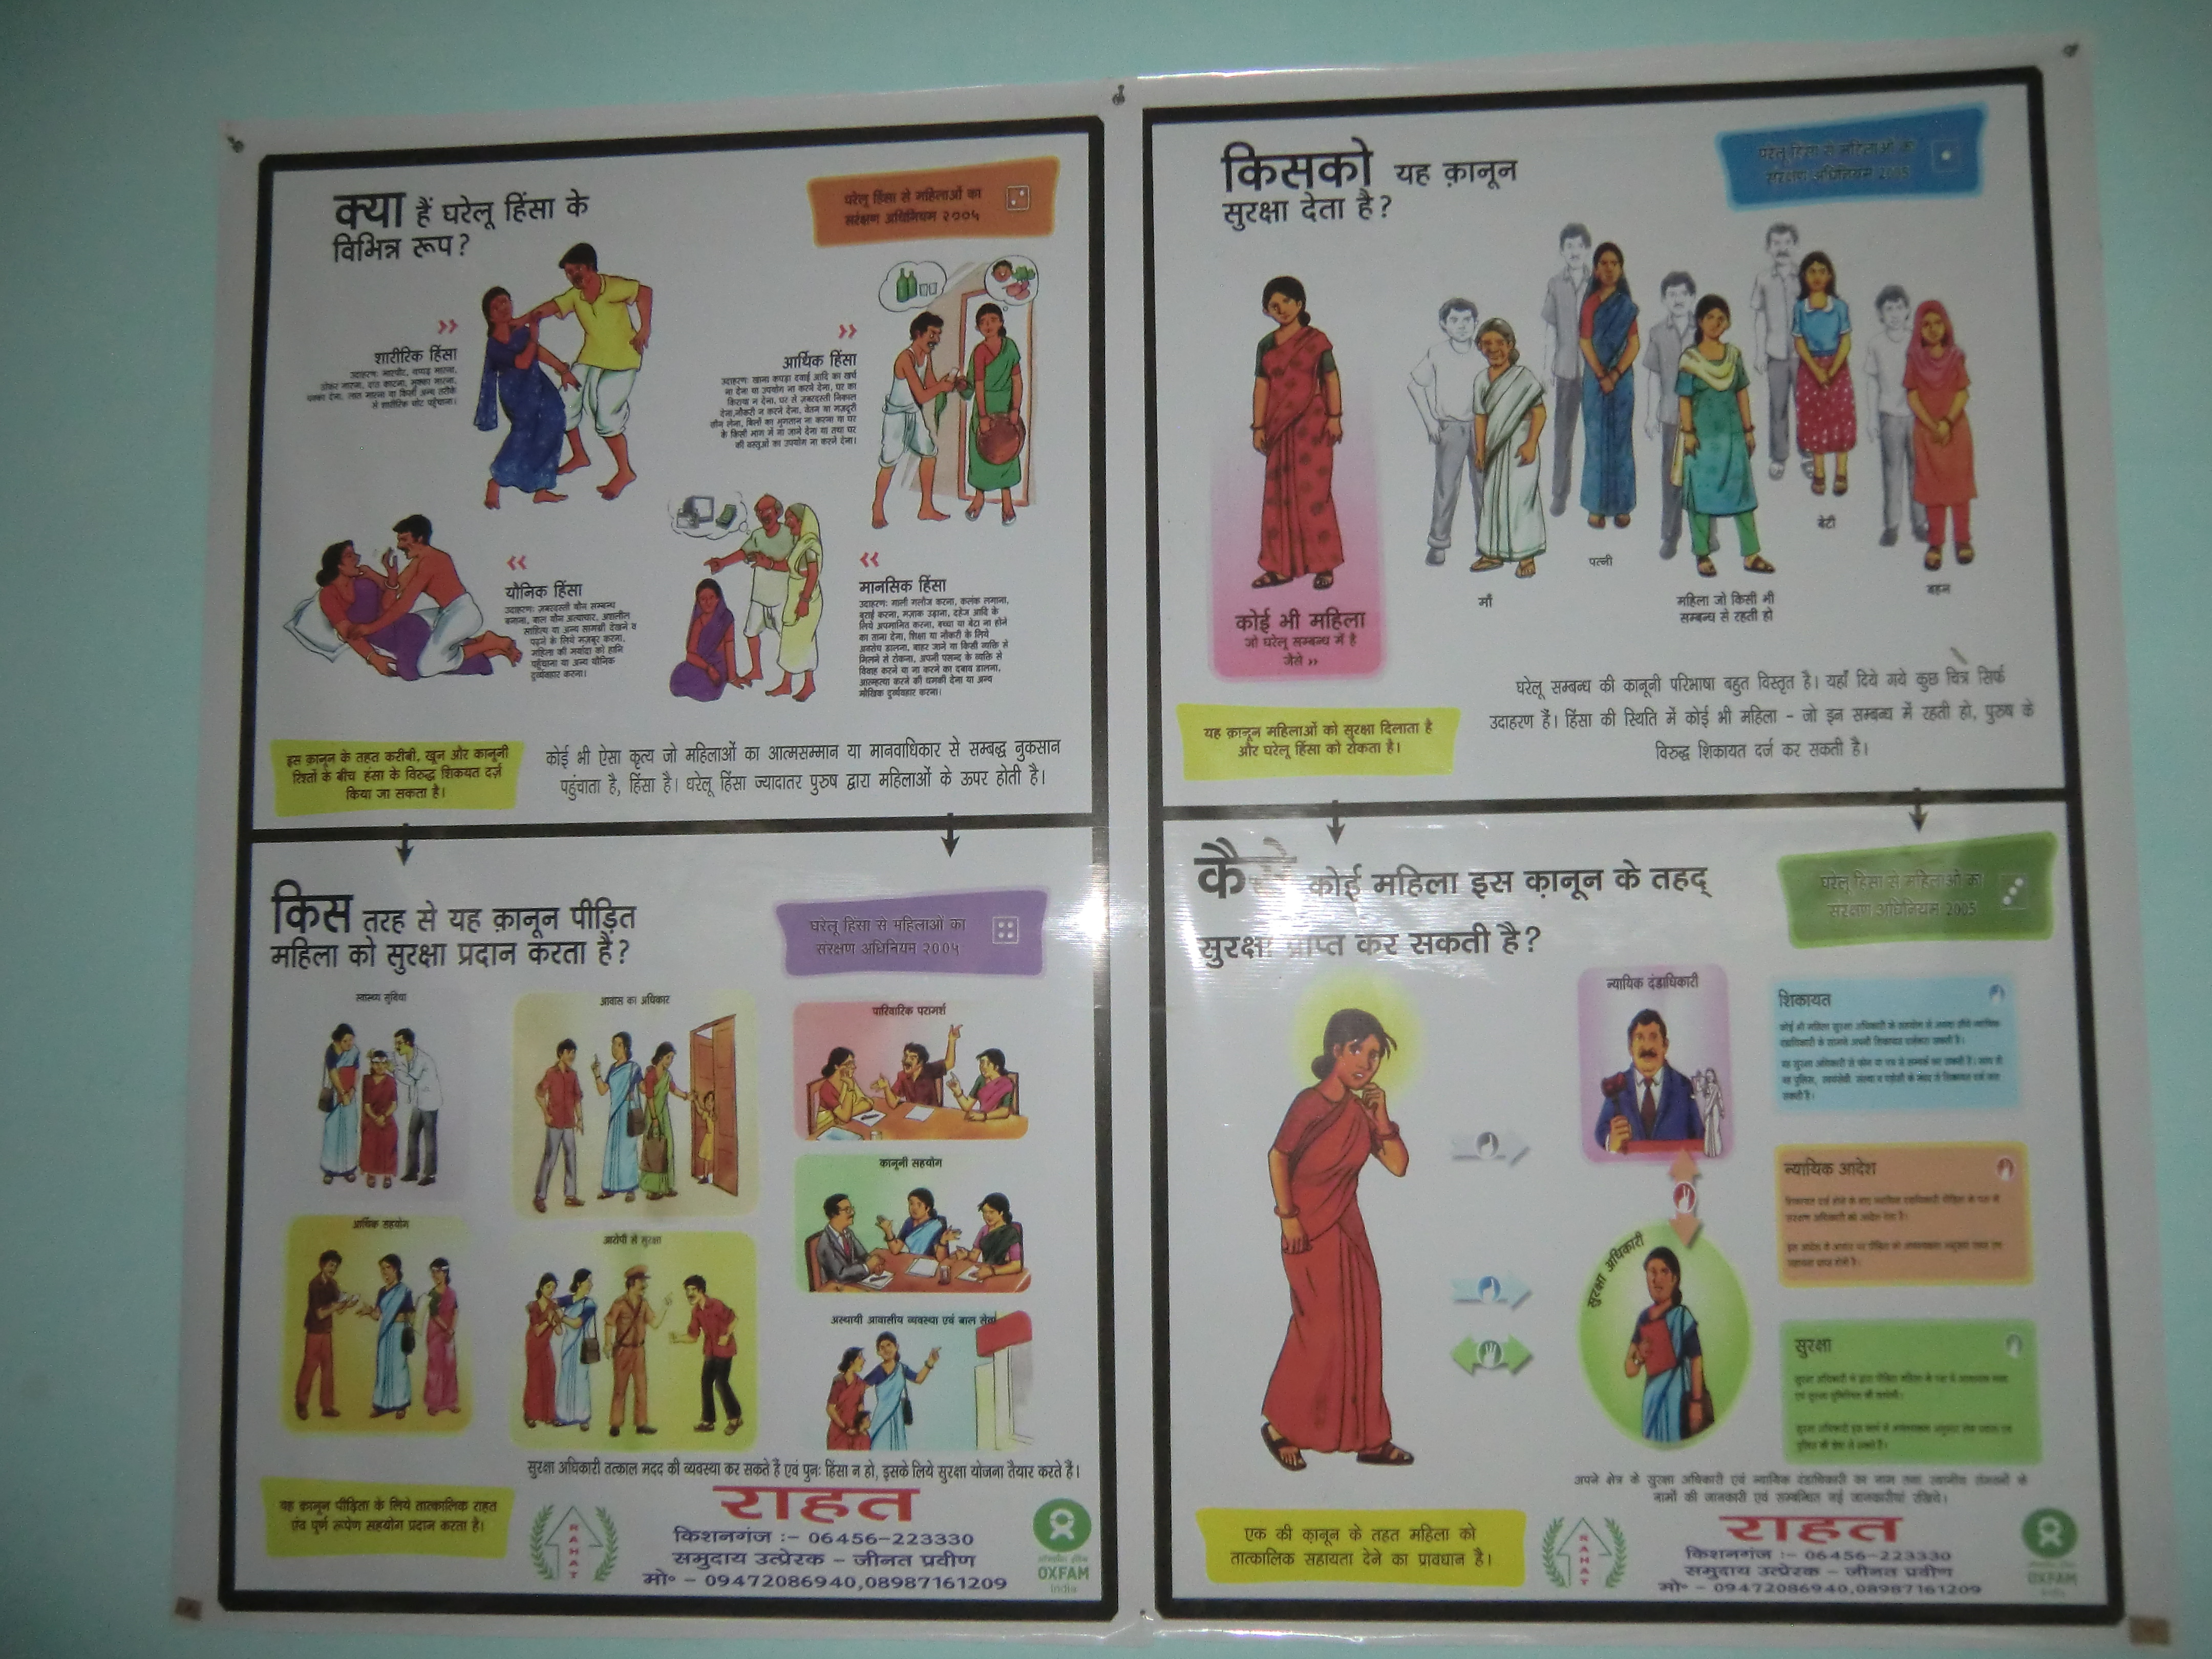 Literature like this is used in training sessions at the Mahila helpline office in Kishanganj to empower village women to secure their entitlements under the Protection of Women from Domestic Violence Act, 2005. (Credit: Ajitha Menon\WFS) 